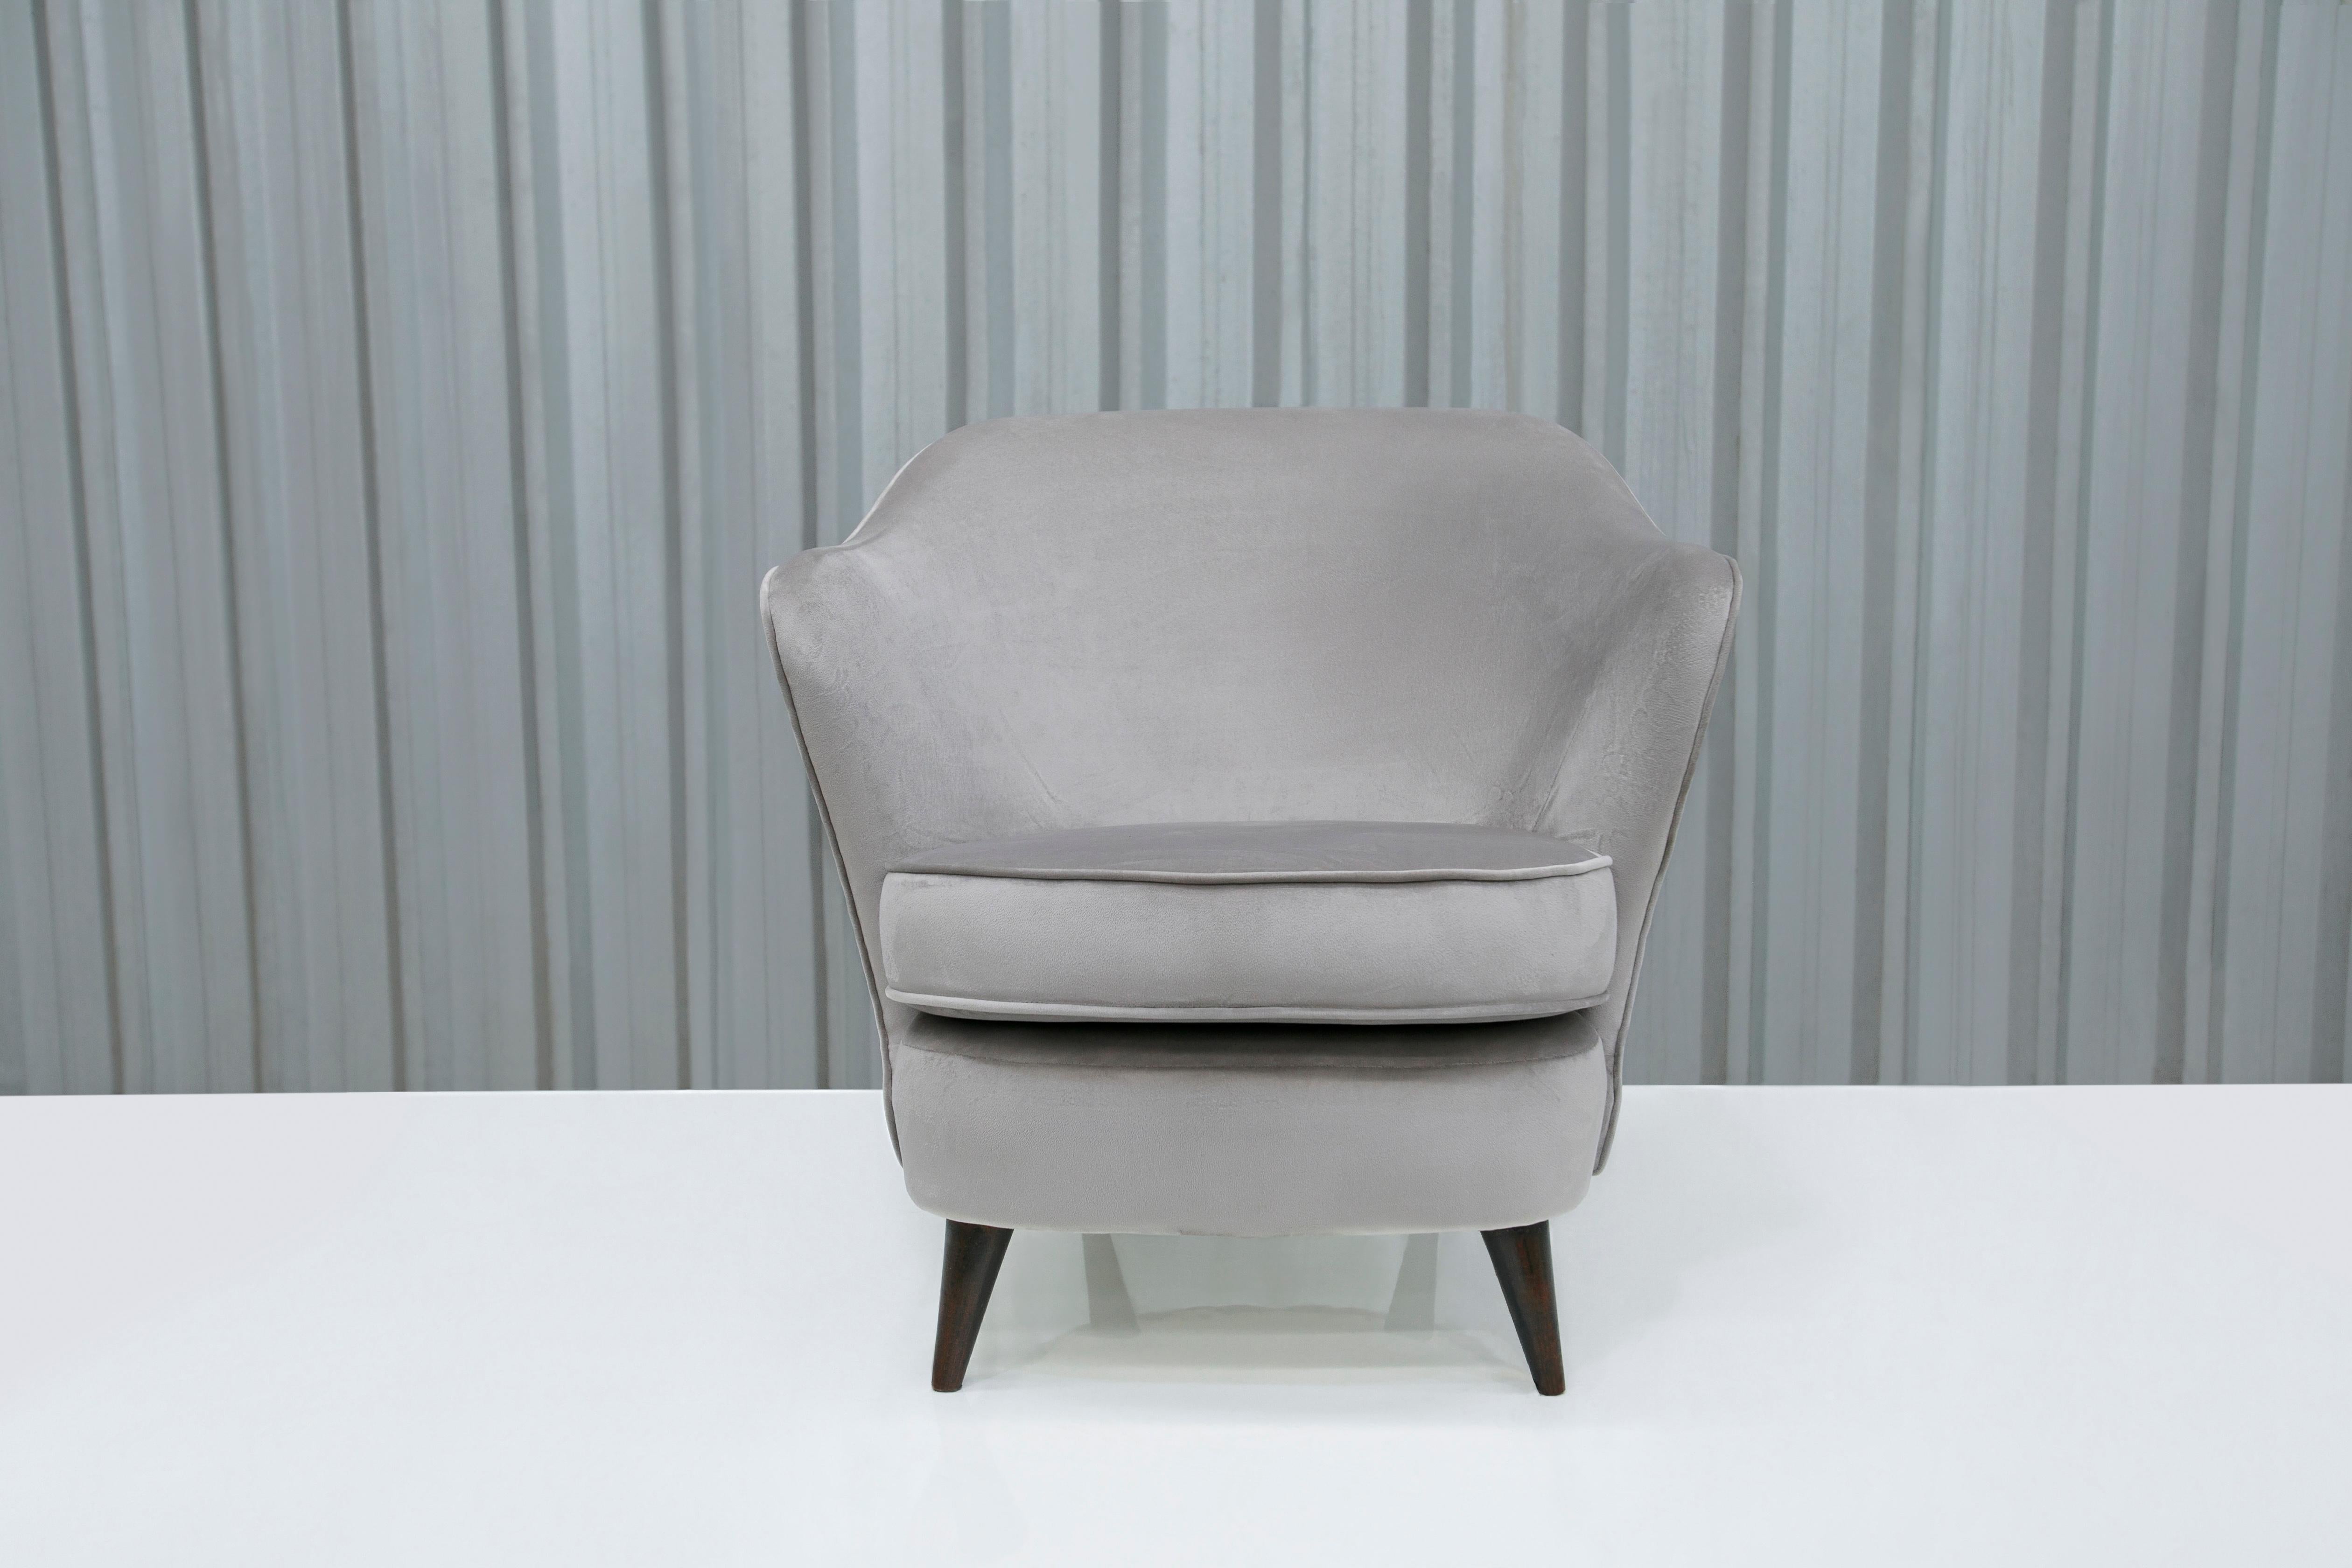 This slim armchair is made with a wooden frame and a soft gray fabric. The legs of the chair are slim, which is a common theme in Brazilian modern armchairs. The cushions are super soft and make the chair very comfortable. This chair is very old but